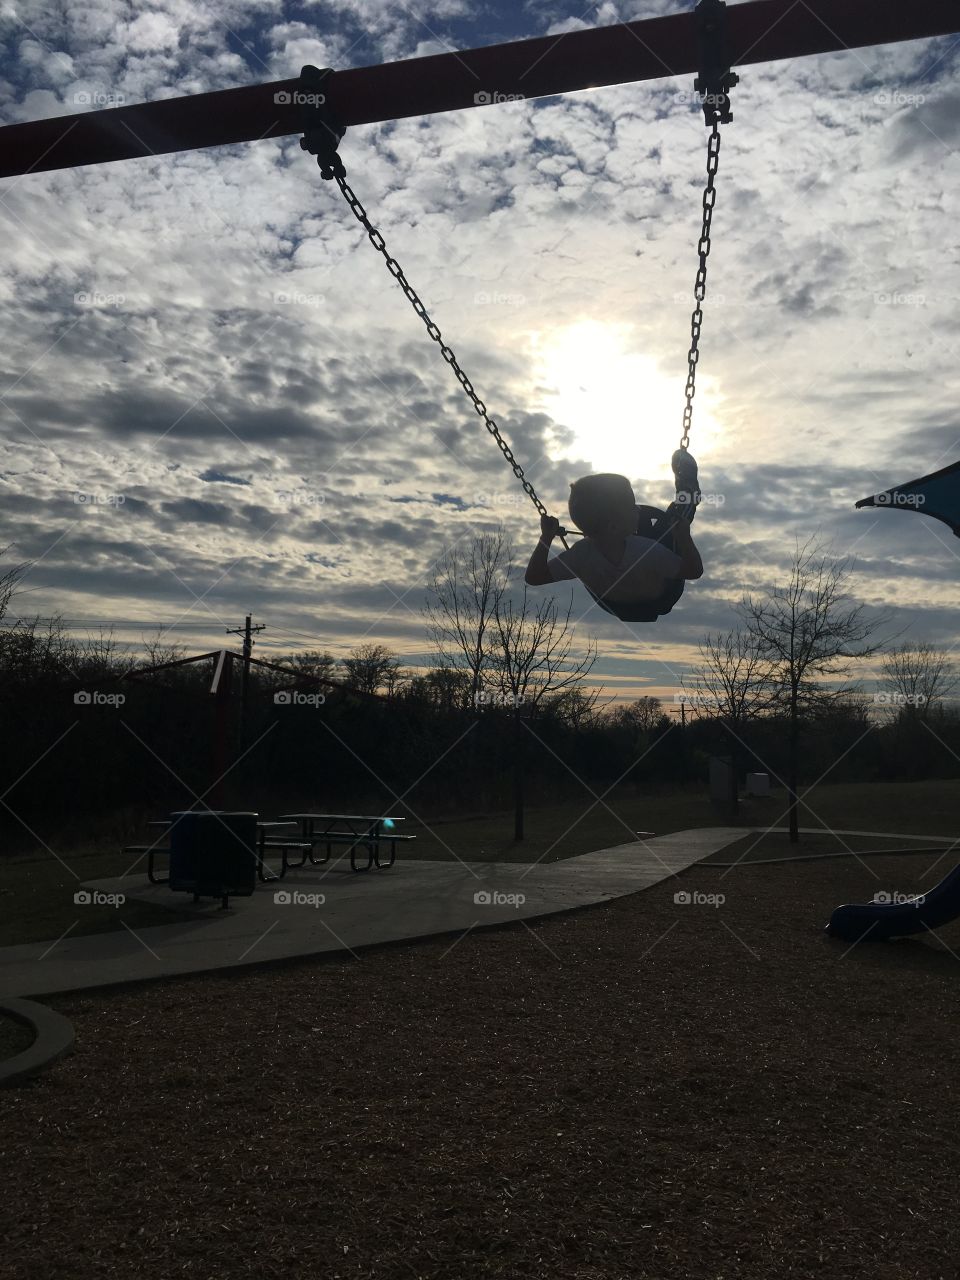 Swinging at the park silhouette 